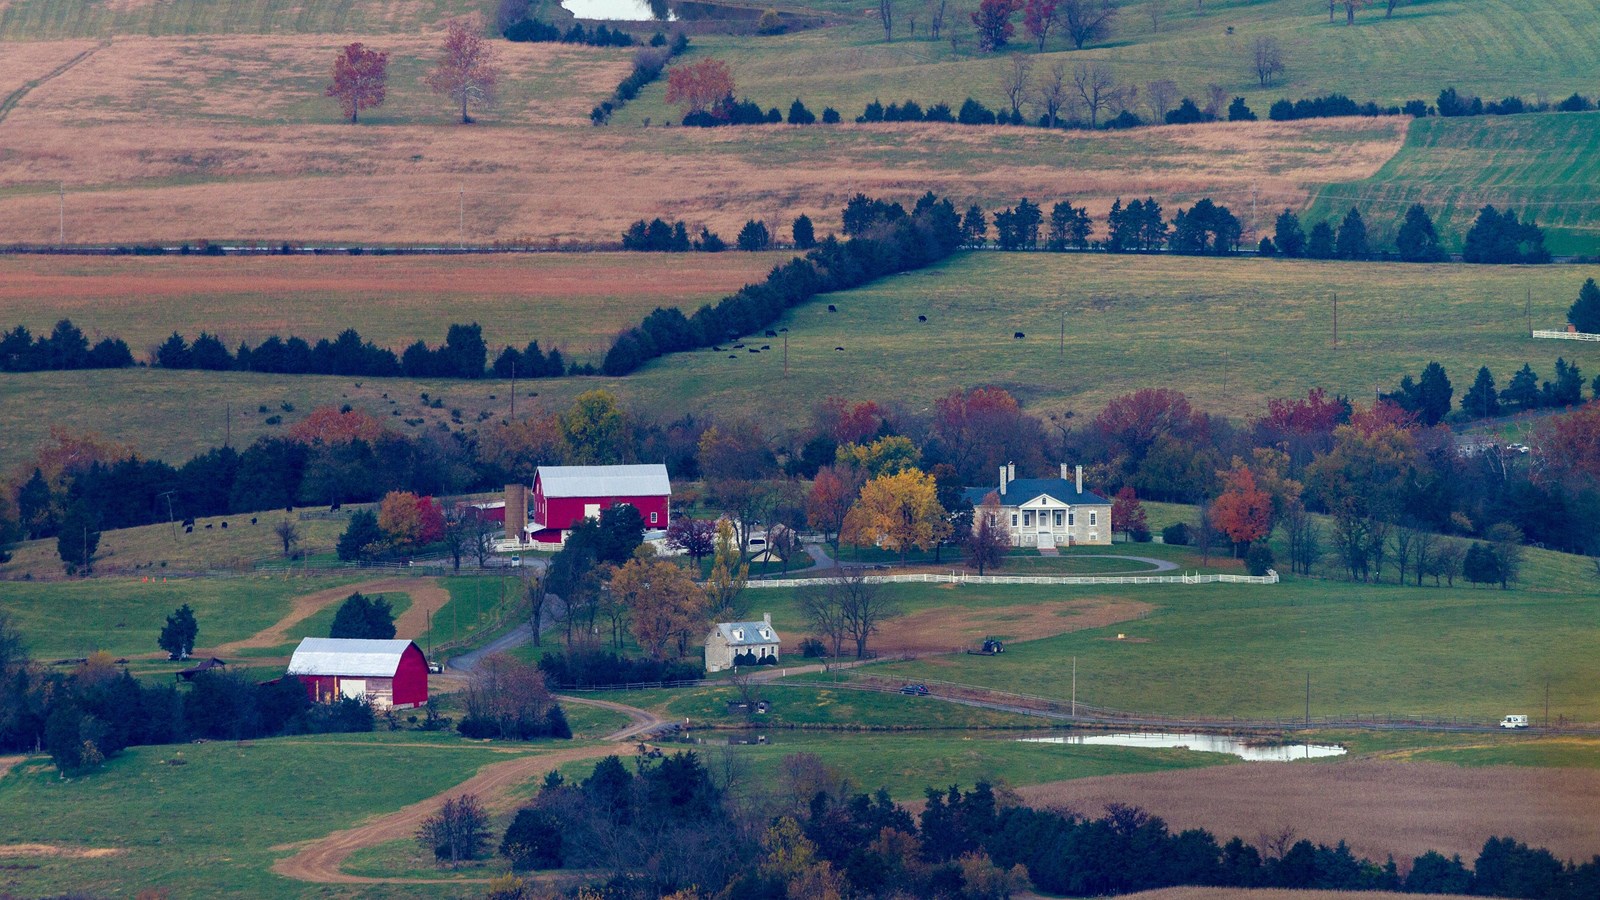 Barns and old plantation buildings among farms on a valley floor are seen from a mountain overlook.